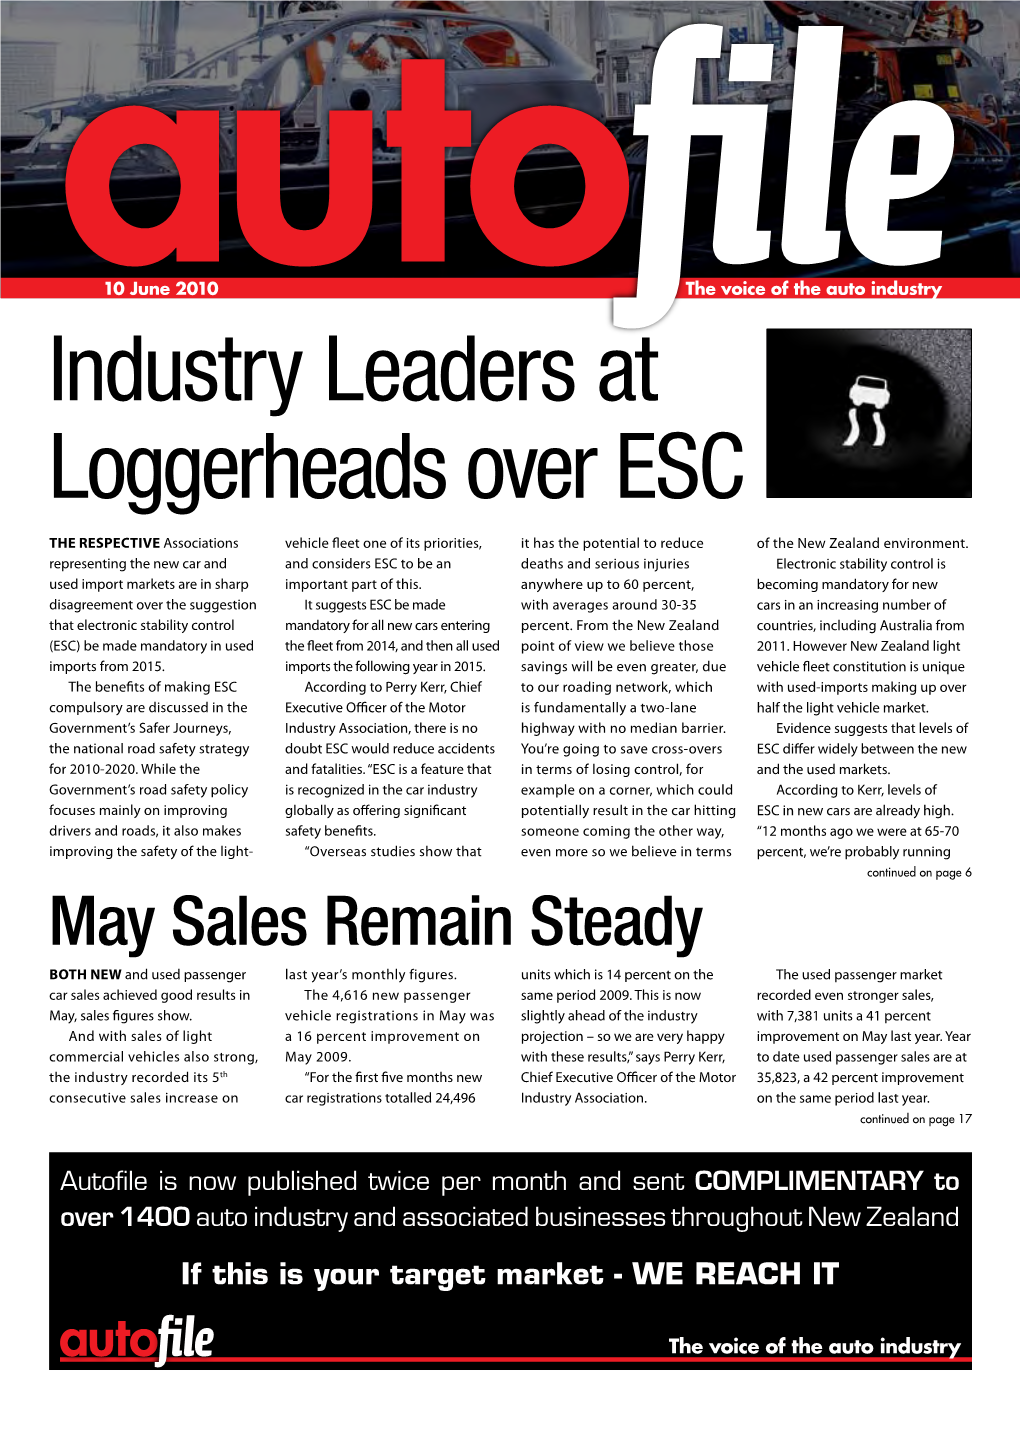 Industry Leaders at Loggerheads Over ESC